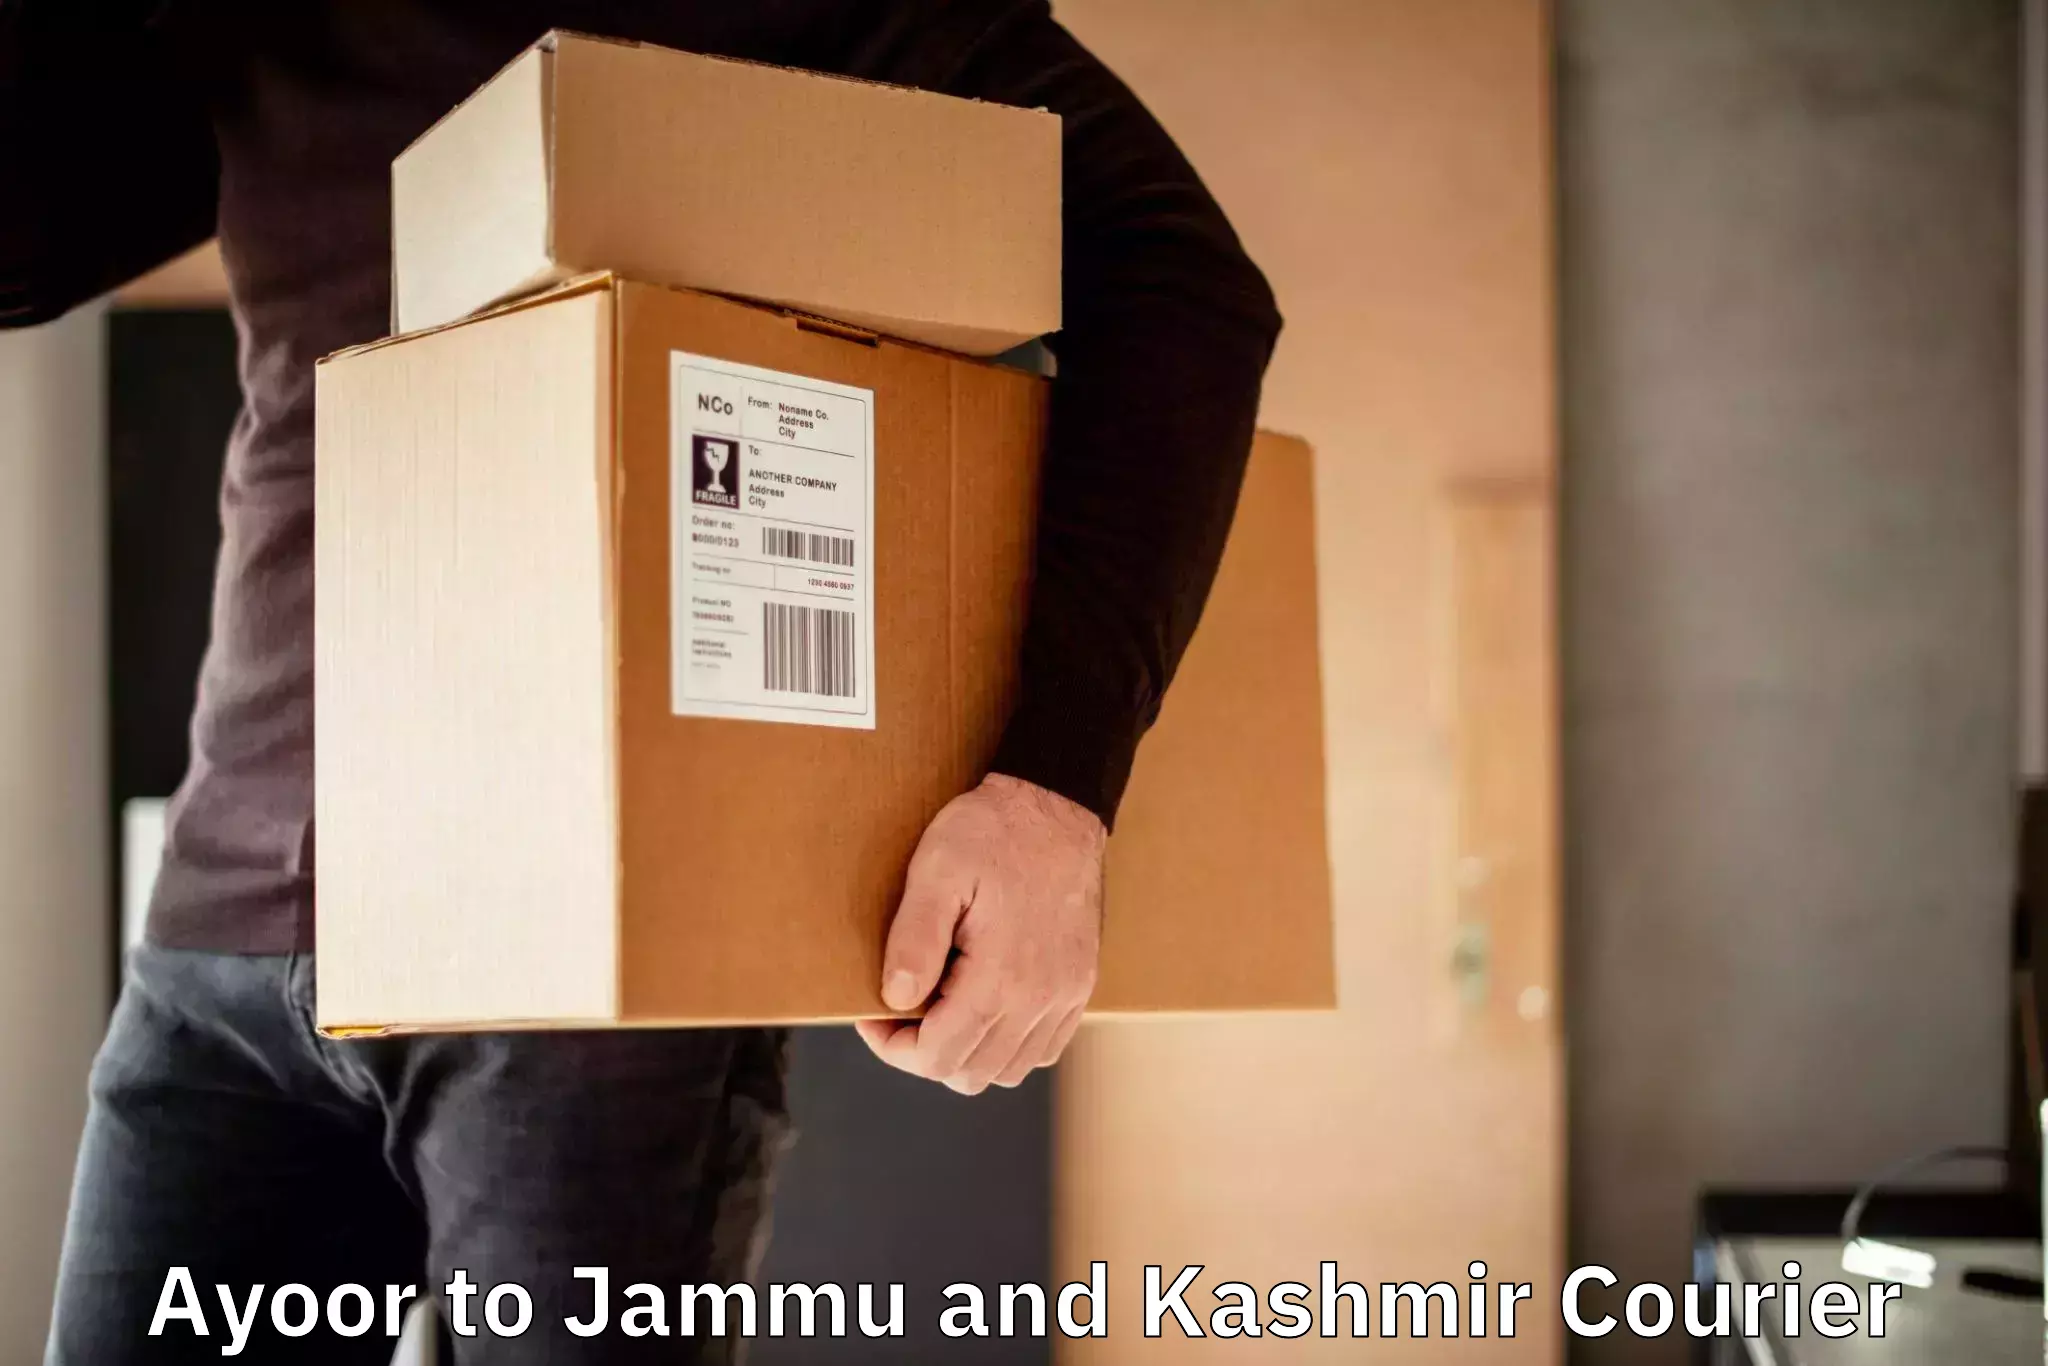 Courier service comparison Ayoor to Jakh